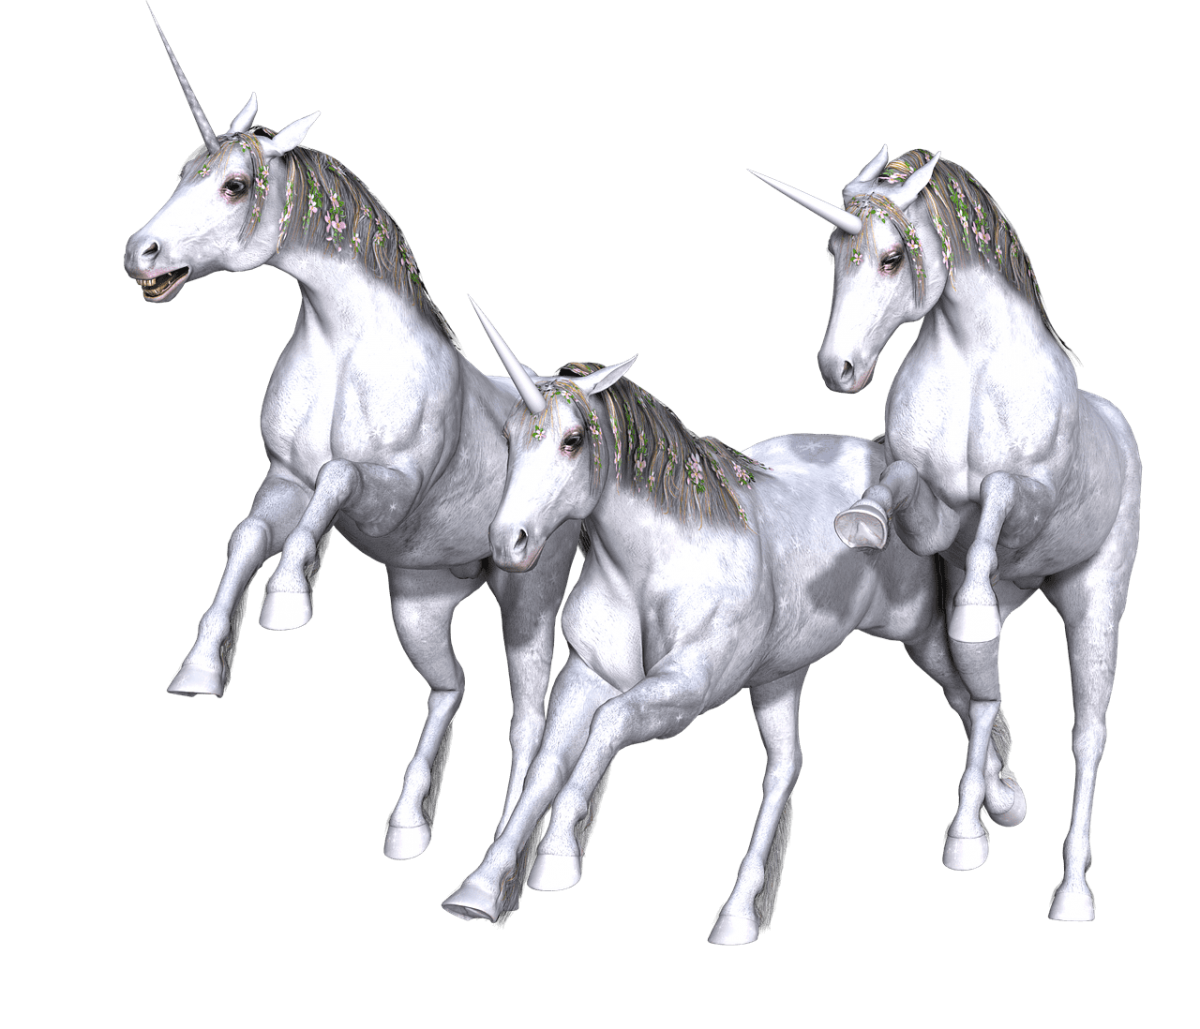 Can We All Participate in The Next Unicorn?